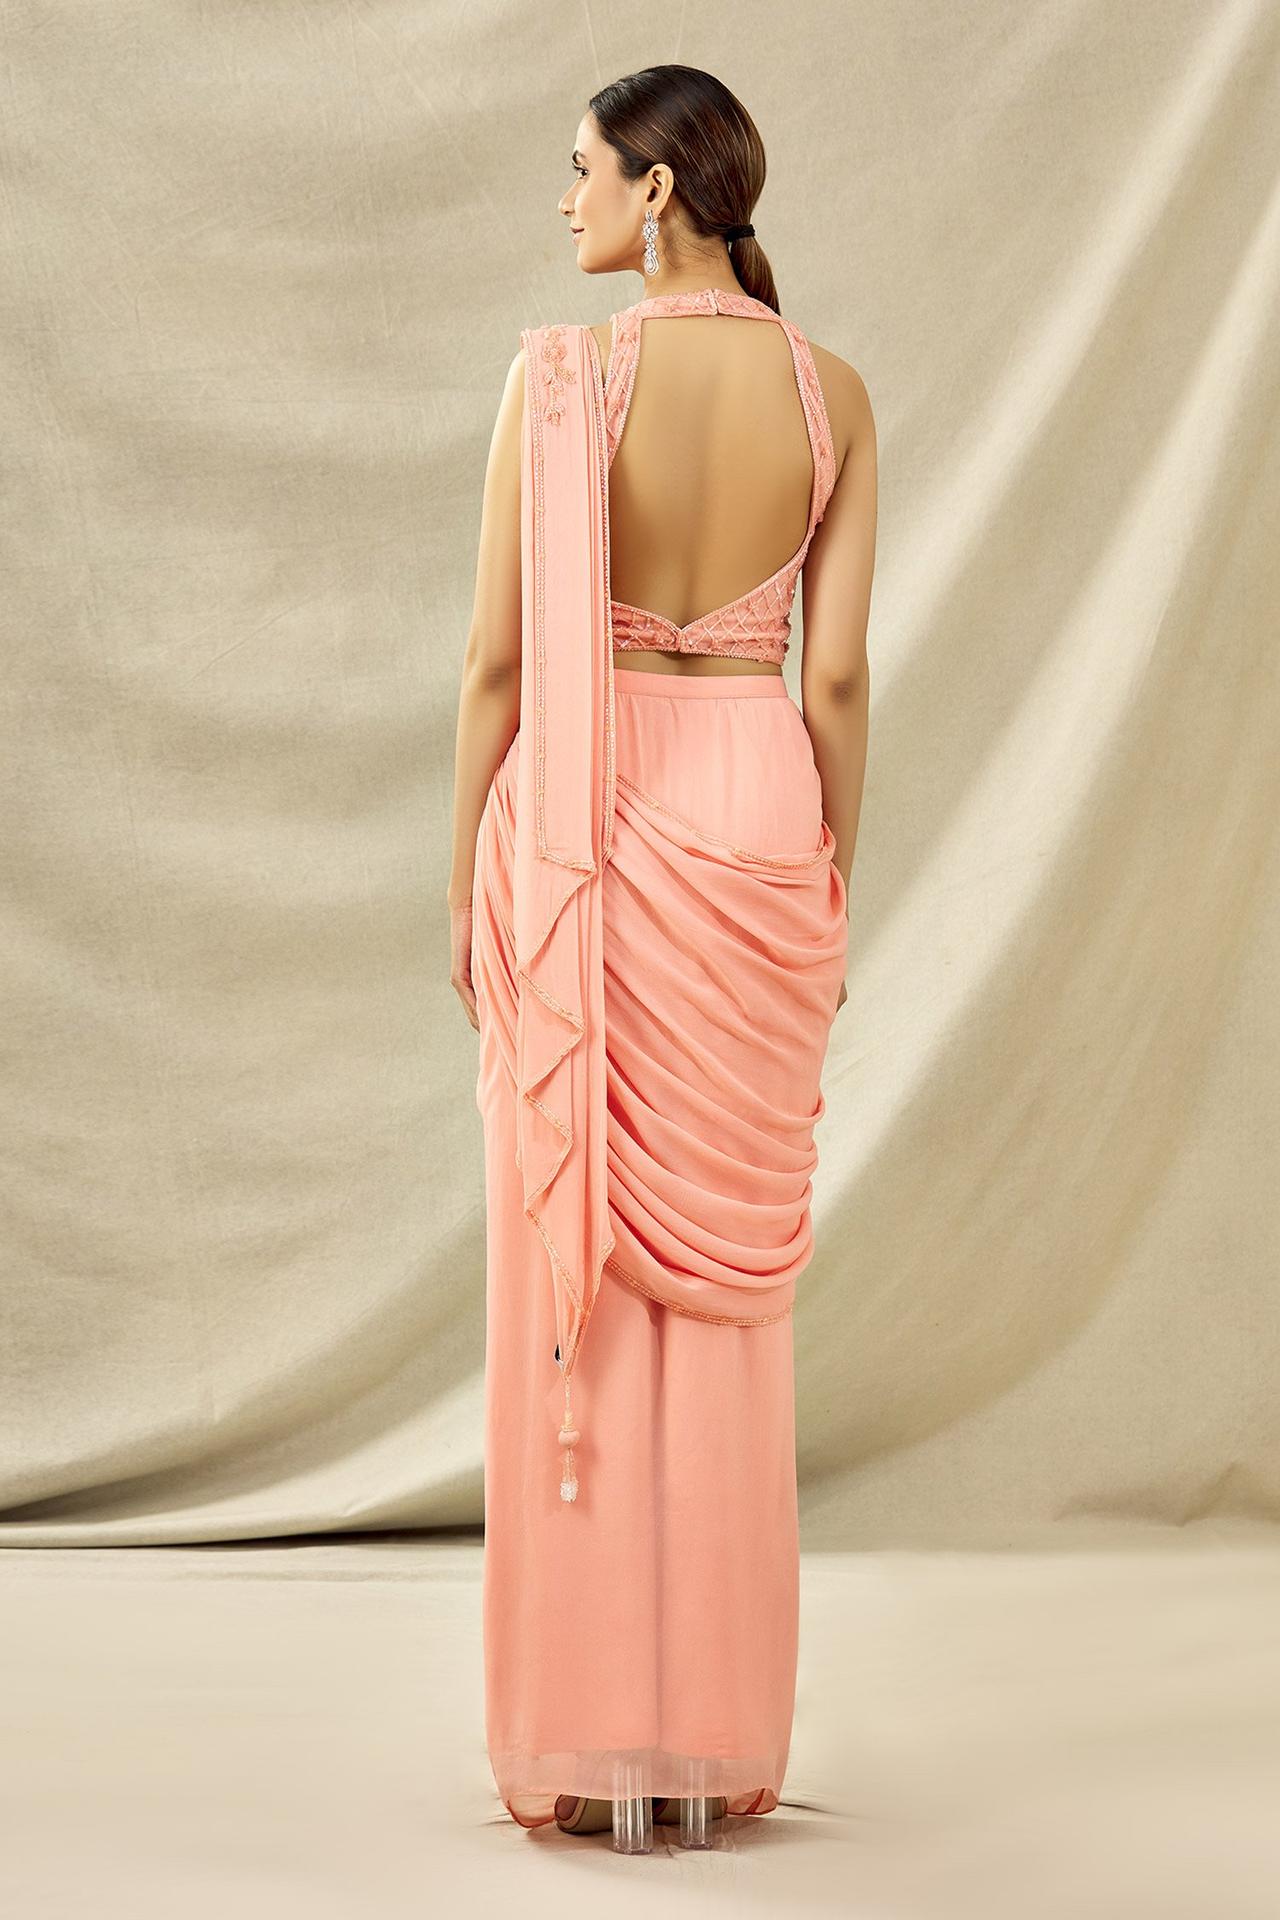 Saree Gown - Etsy